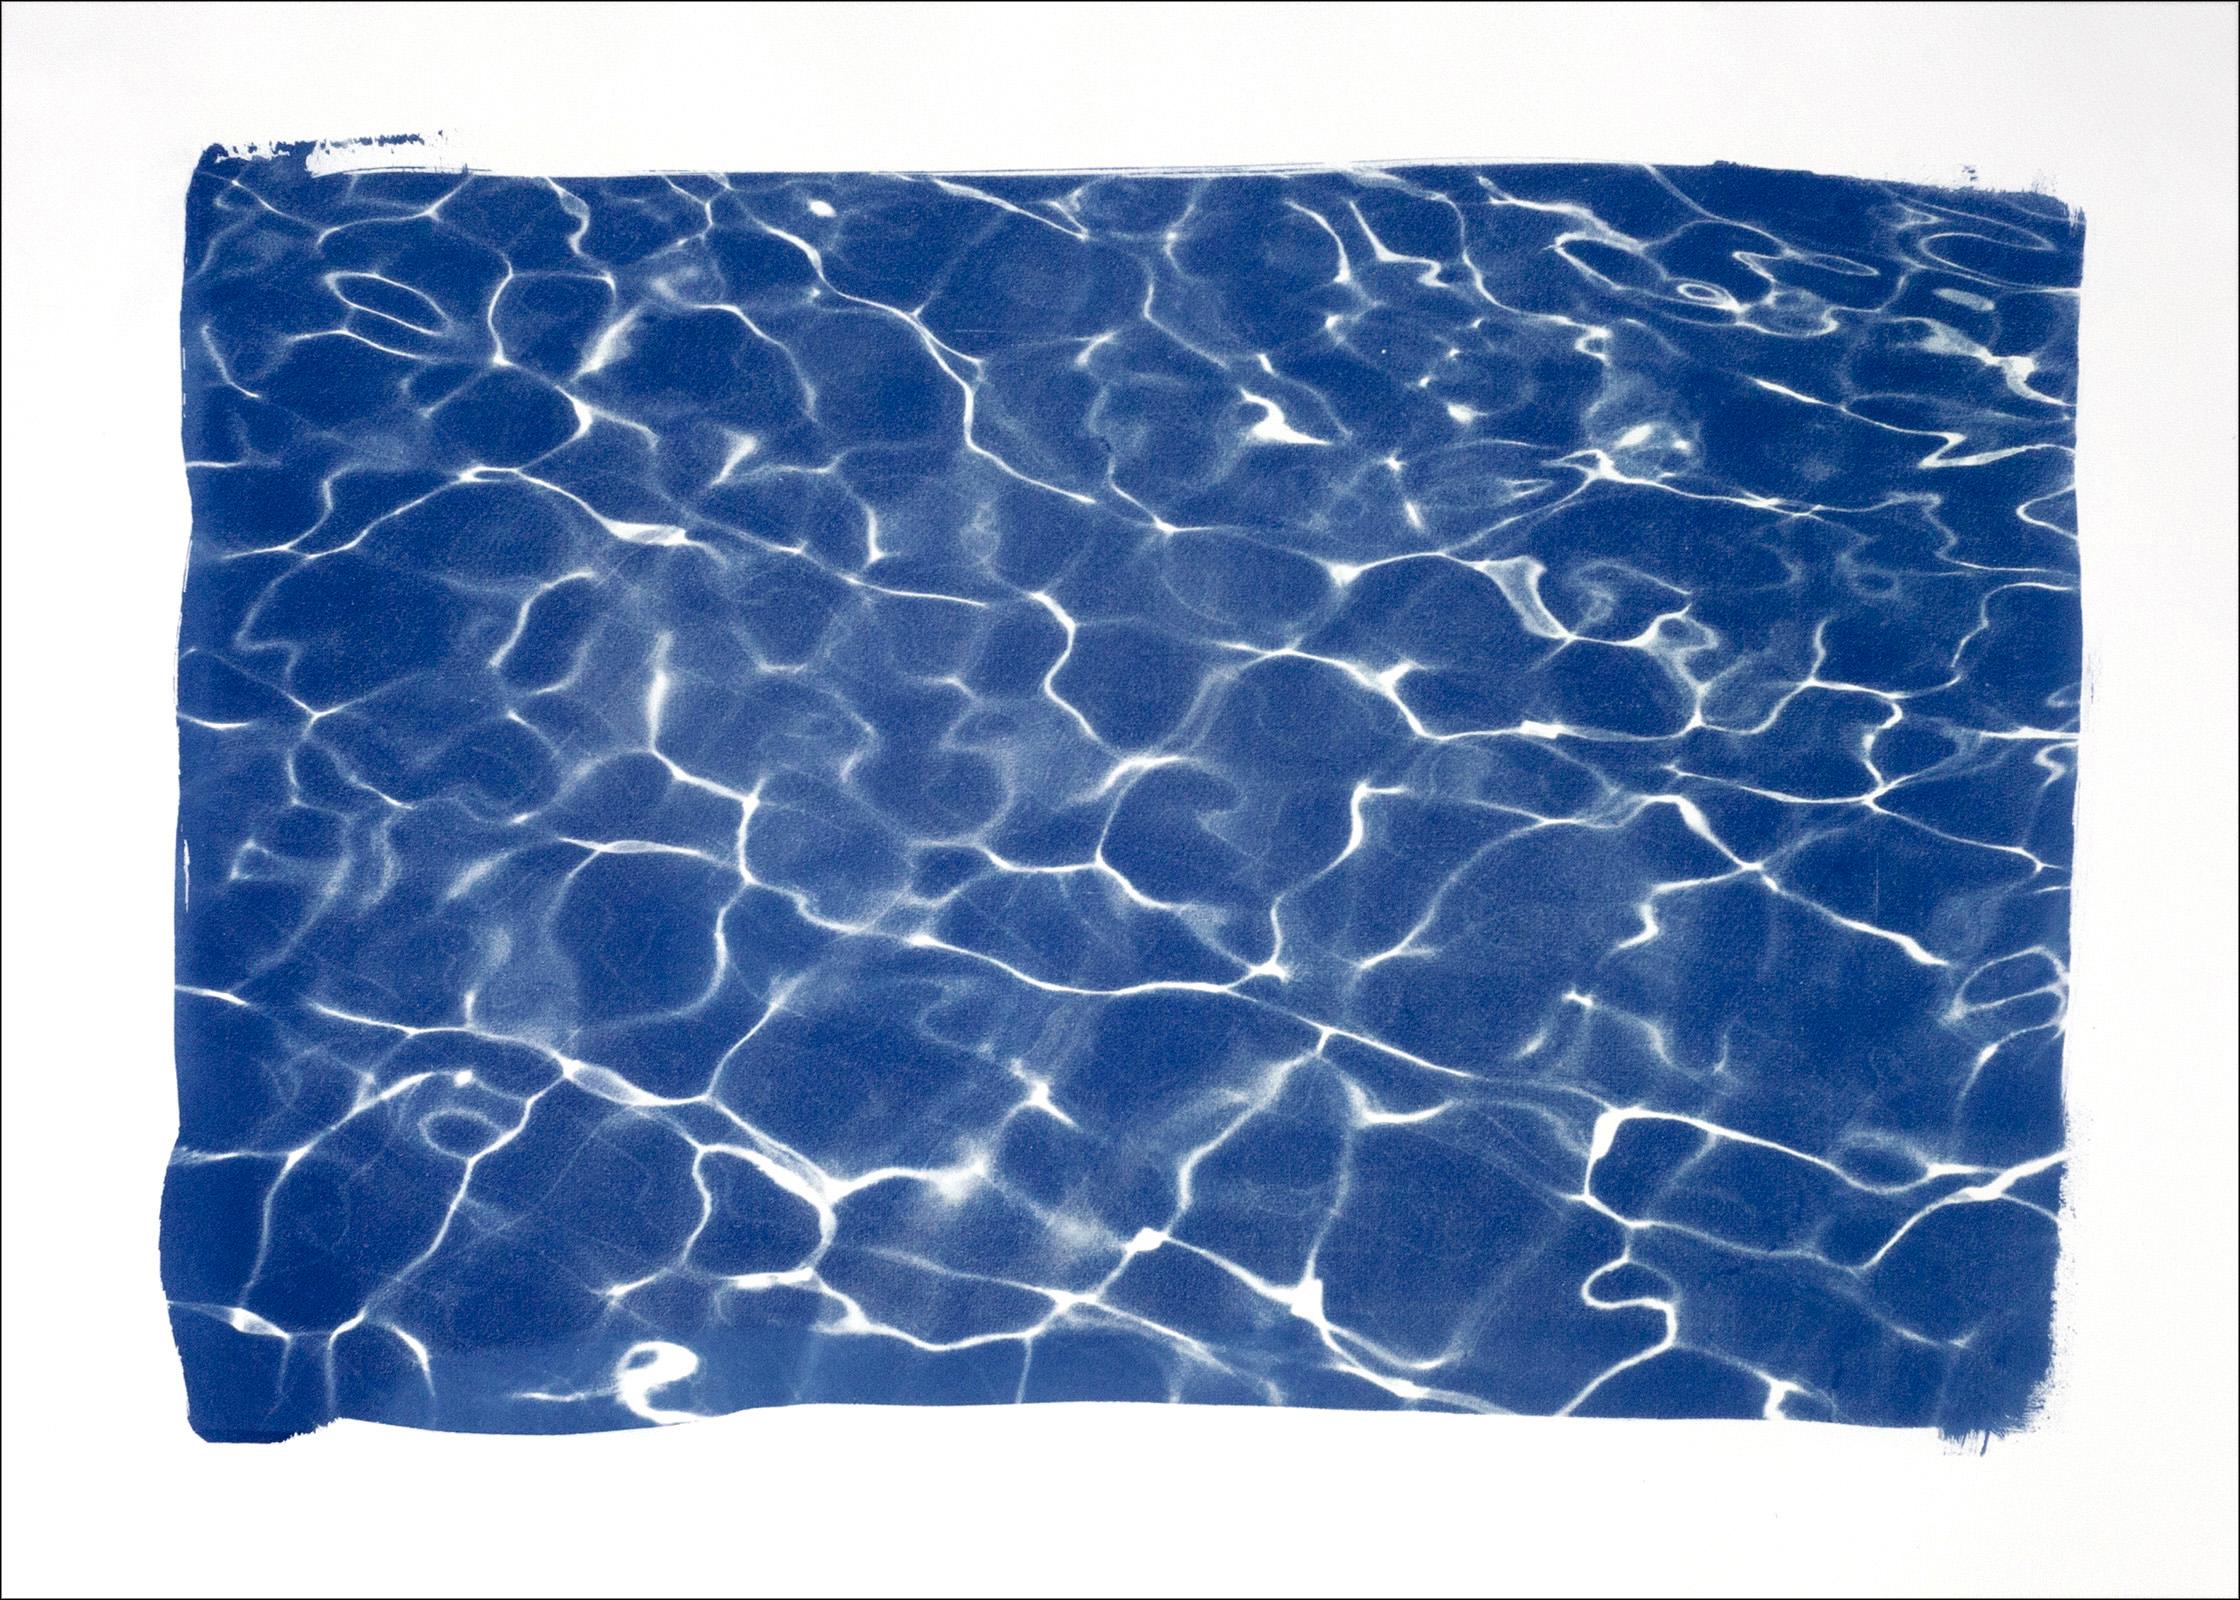 Kind of Cyan Abstract Drawing - Hollywood Pool House Glow, Exclusive Handmade Cyanotype Print of Blue Patterns